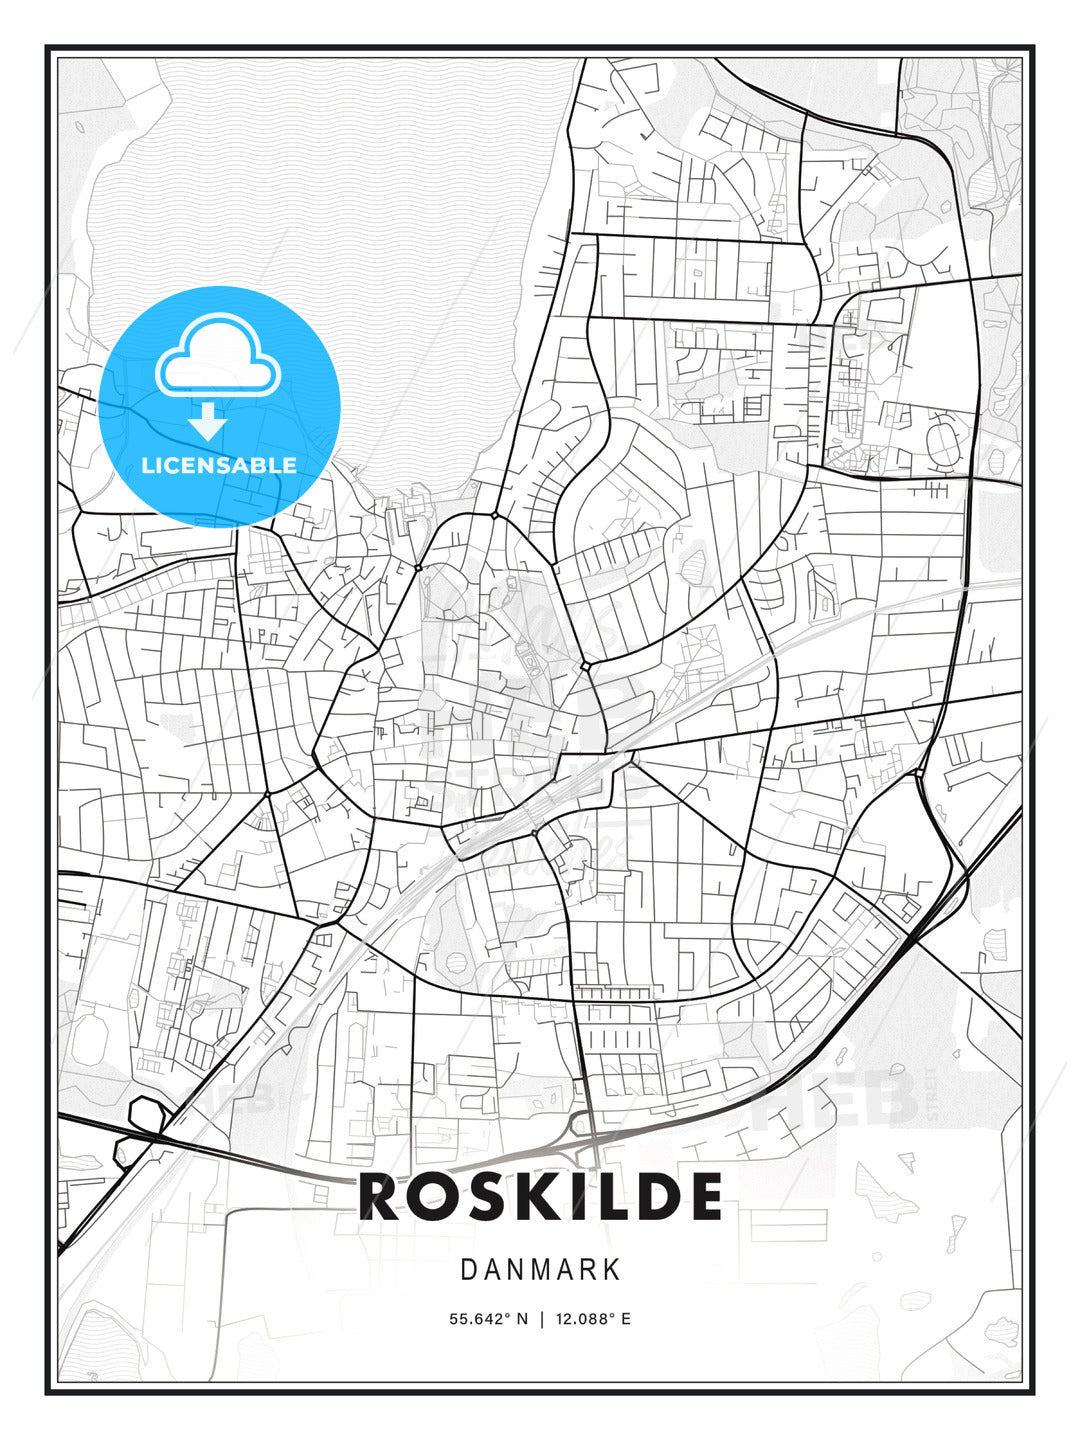 Roskilde, Denmark, Modern Print Template in Various Formats - HEBSTREITS Sketches